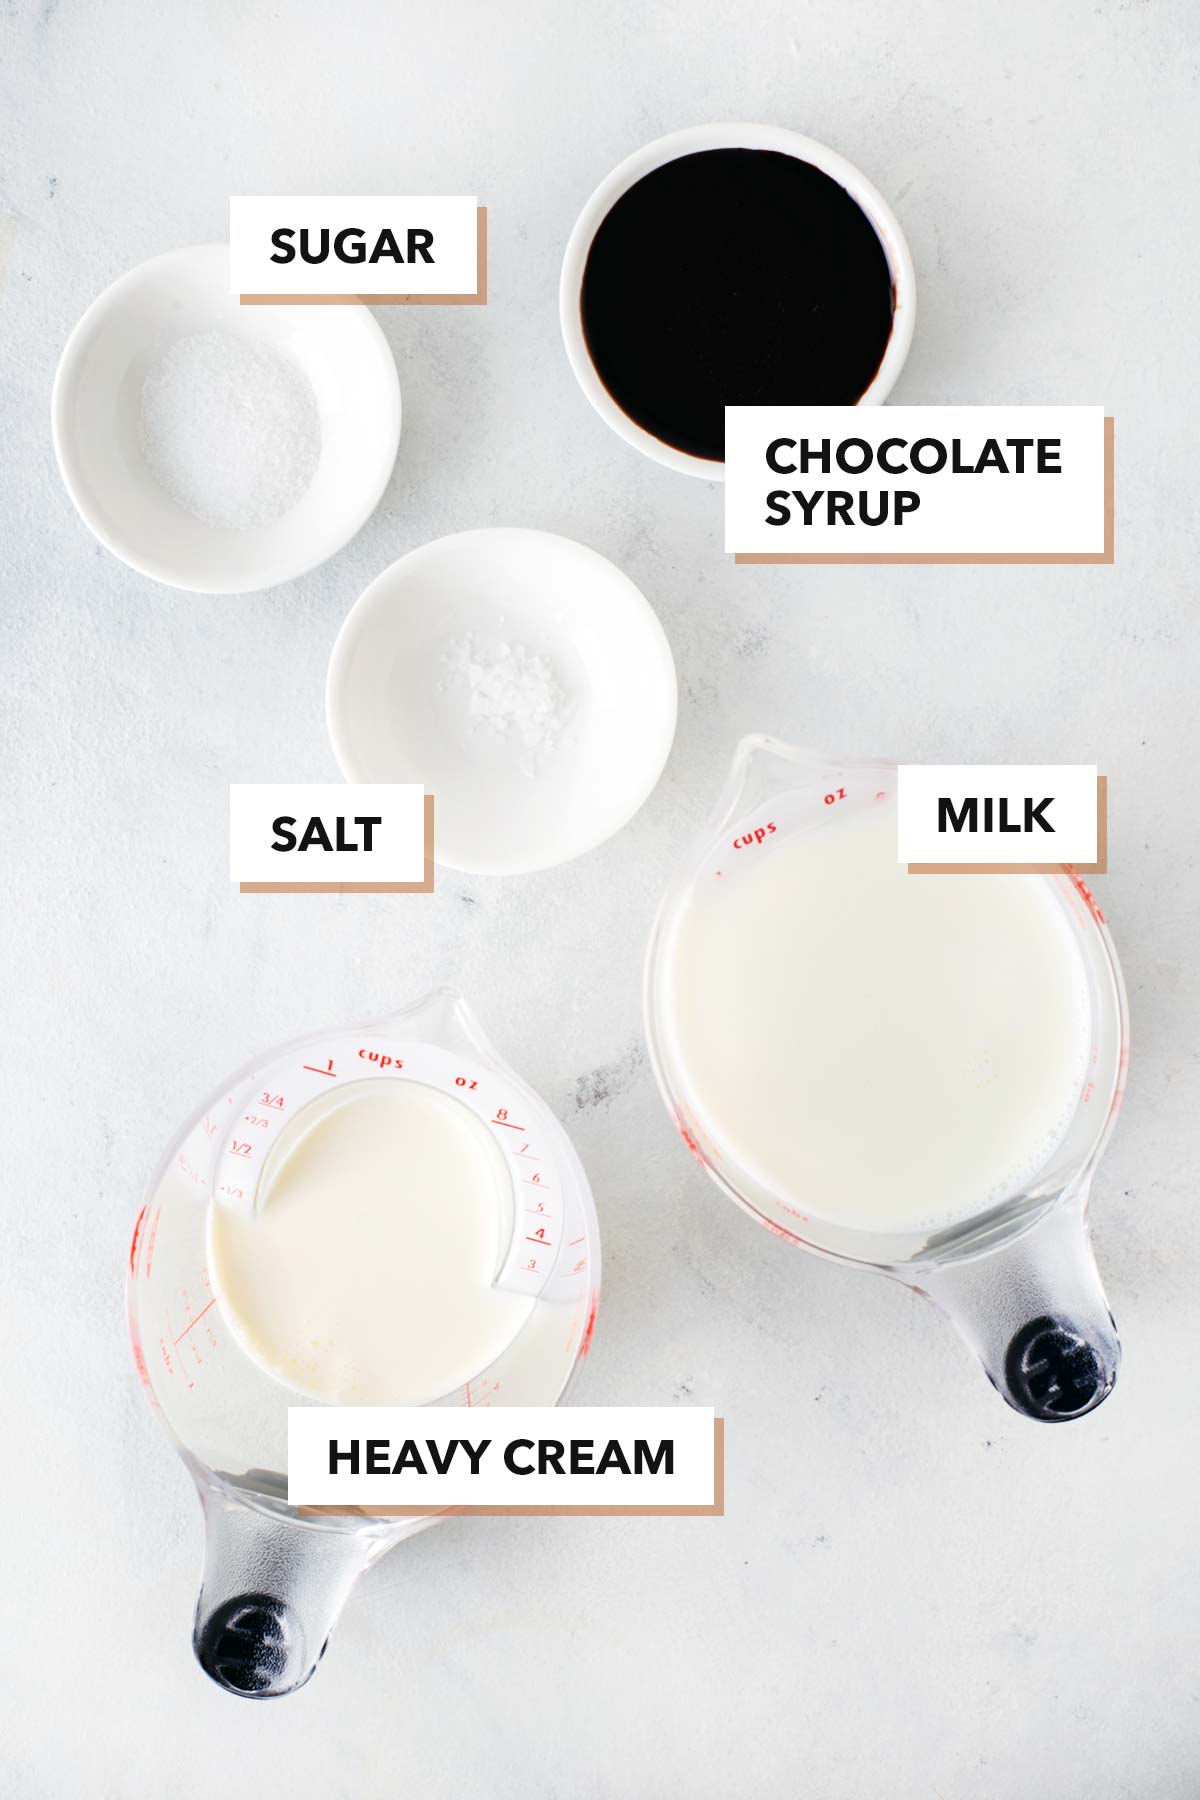 Ingredients to make a hot chocolate.